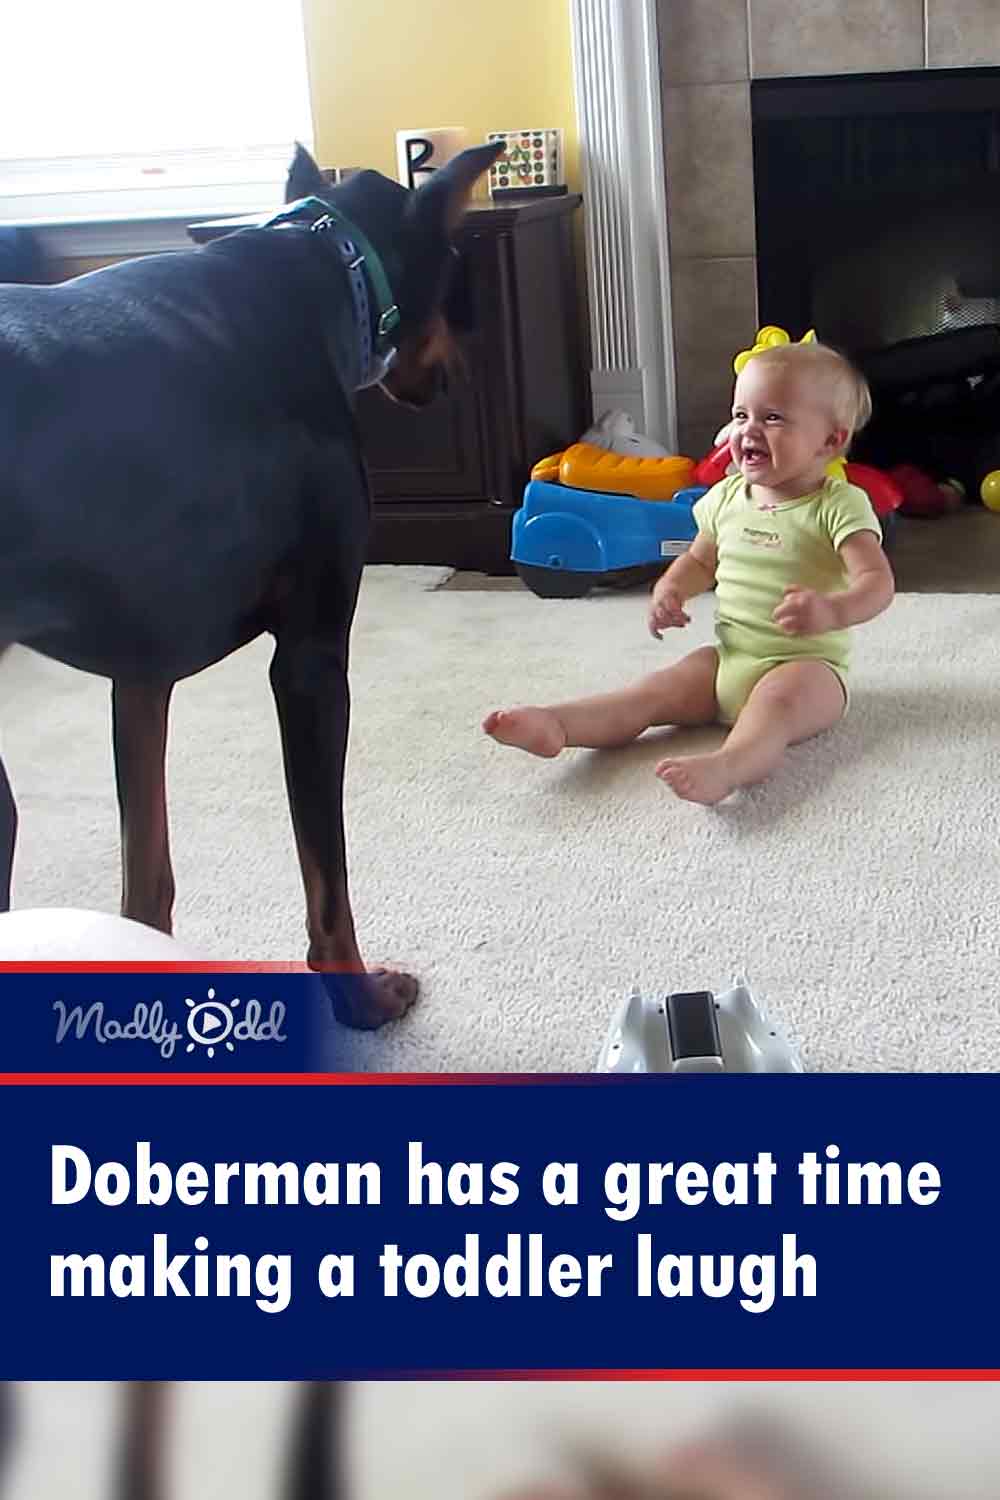 Doberman has a great time making a toddler laugh